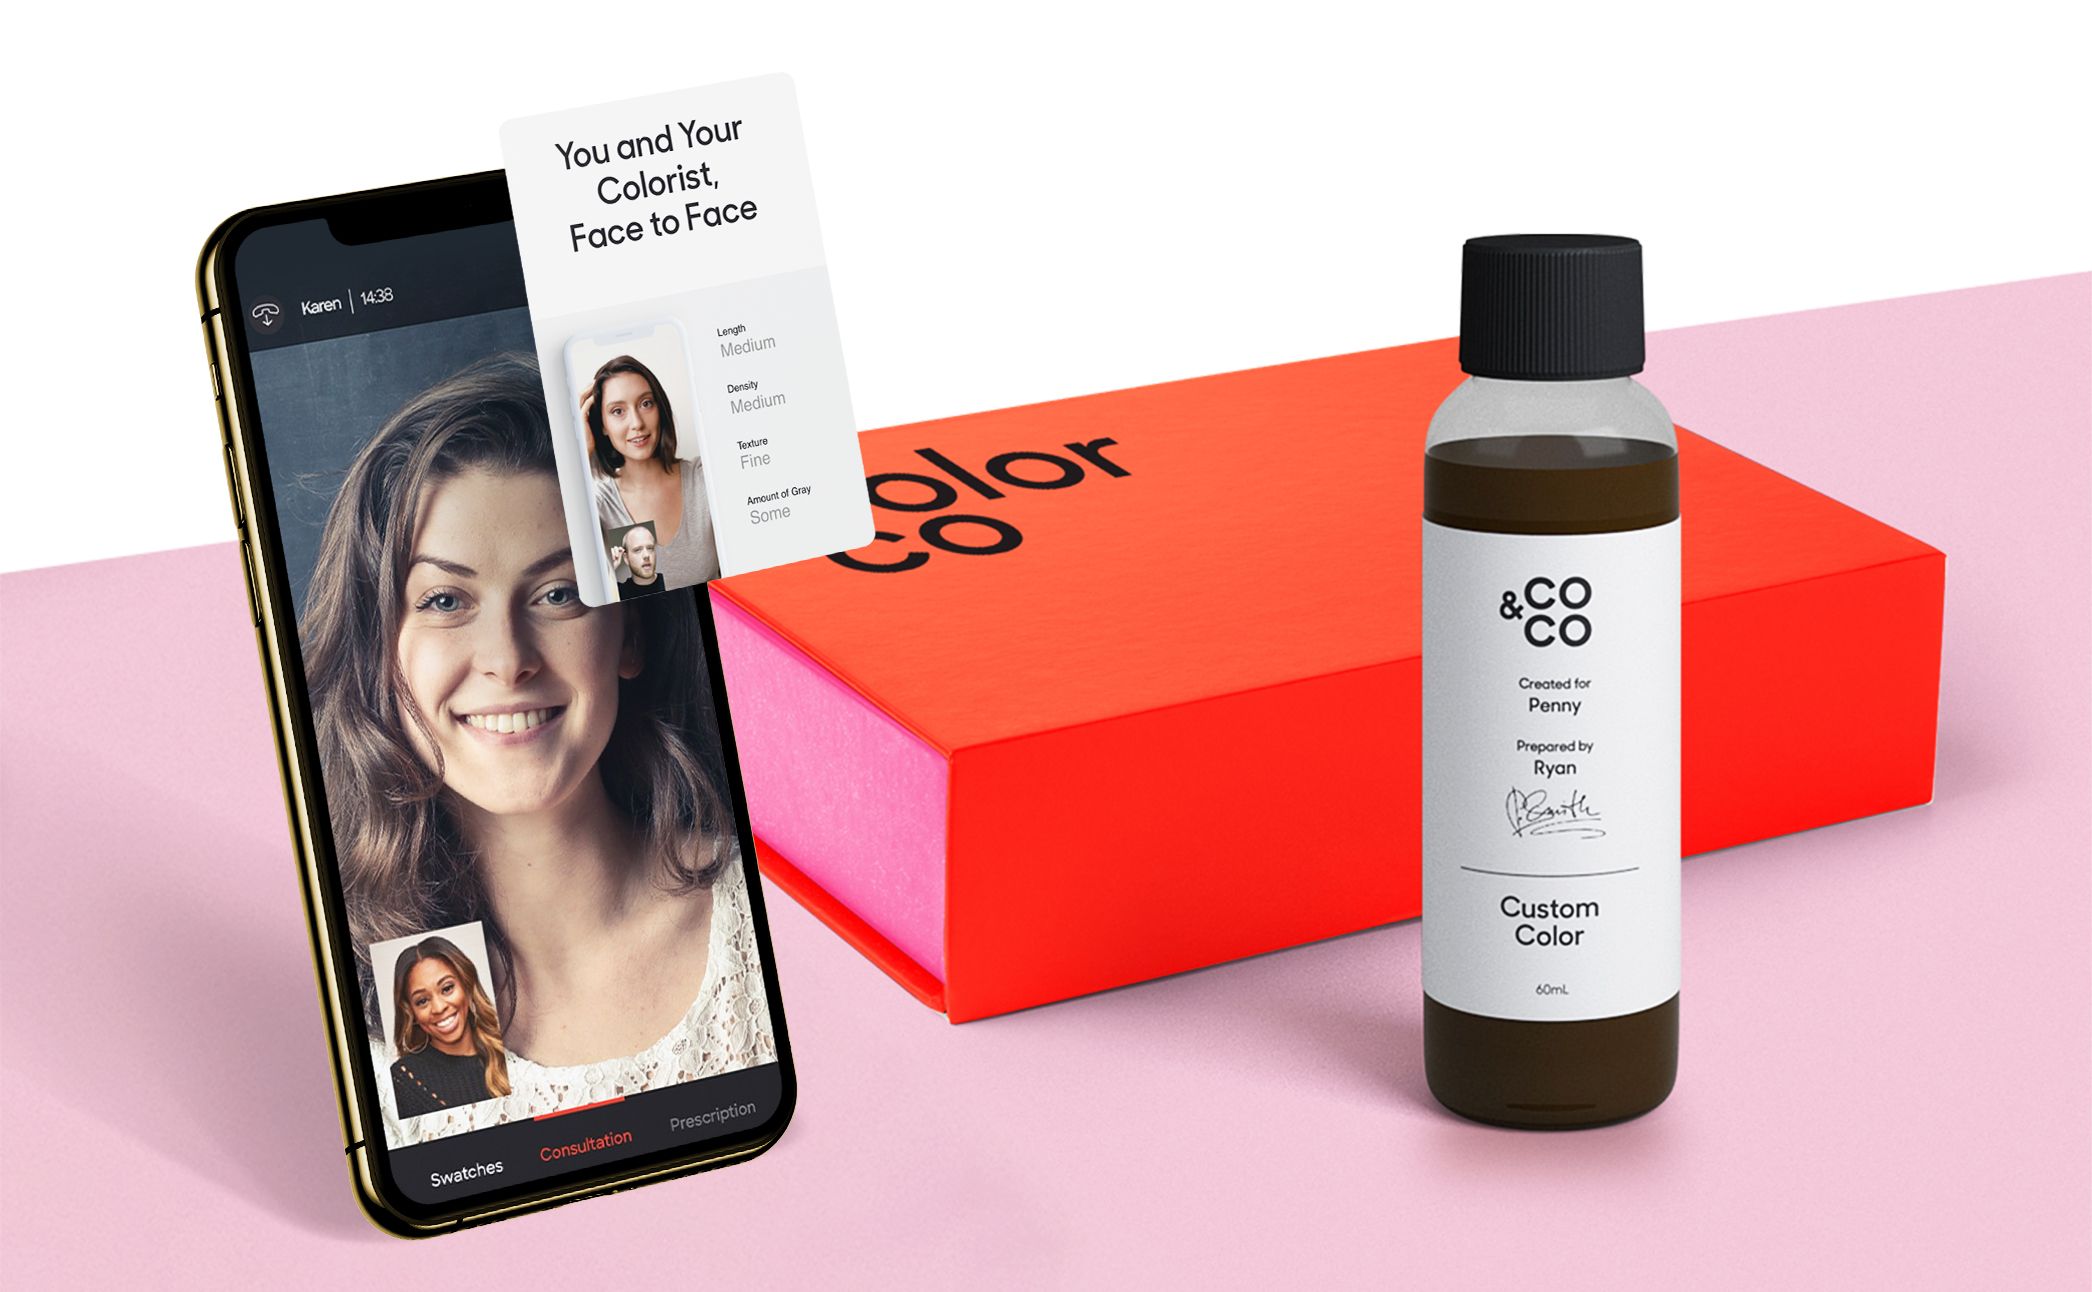 Color & Co product shown next to consultant displayed on a mobile phone